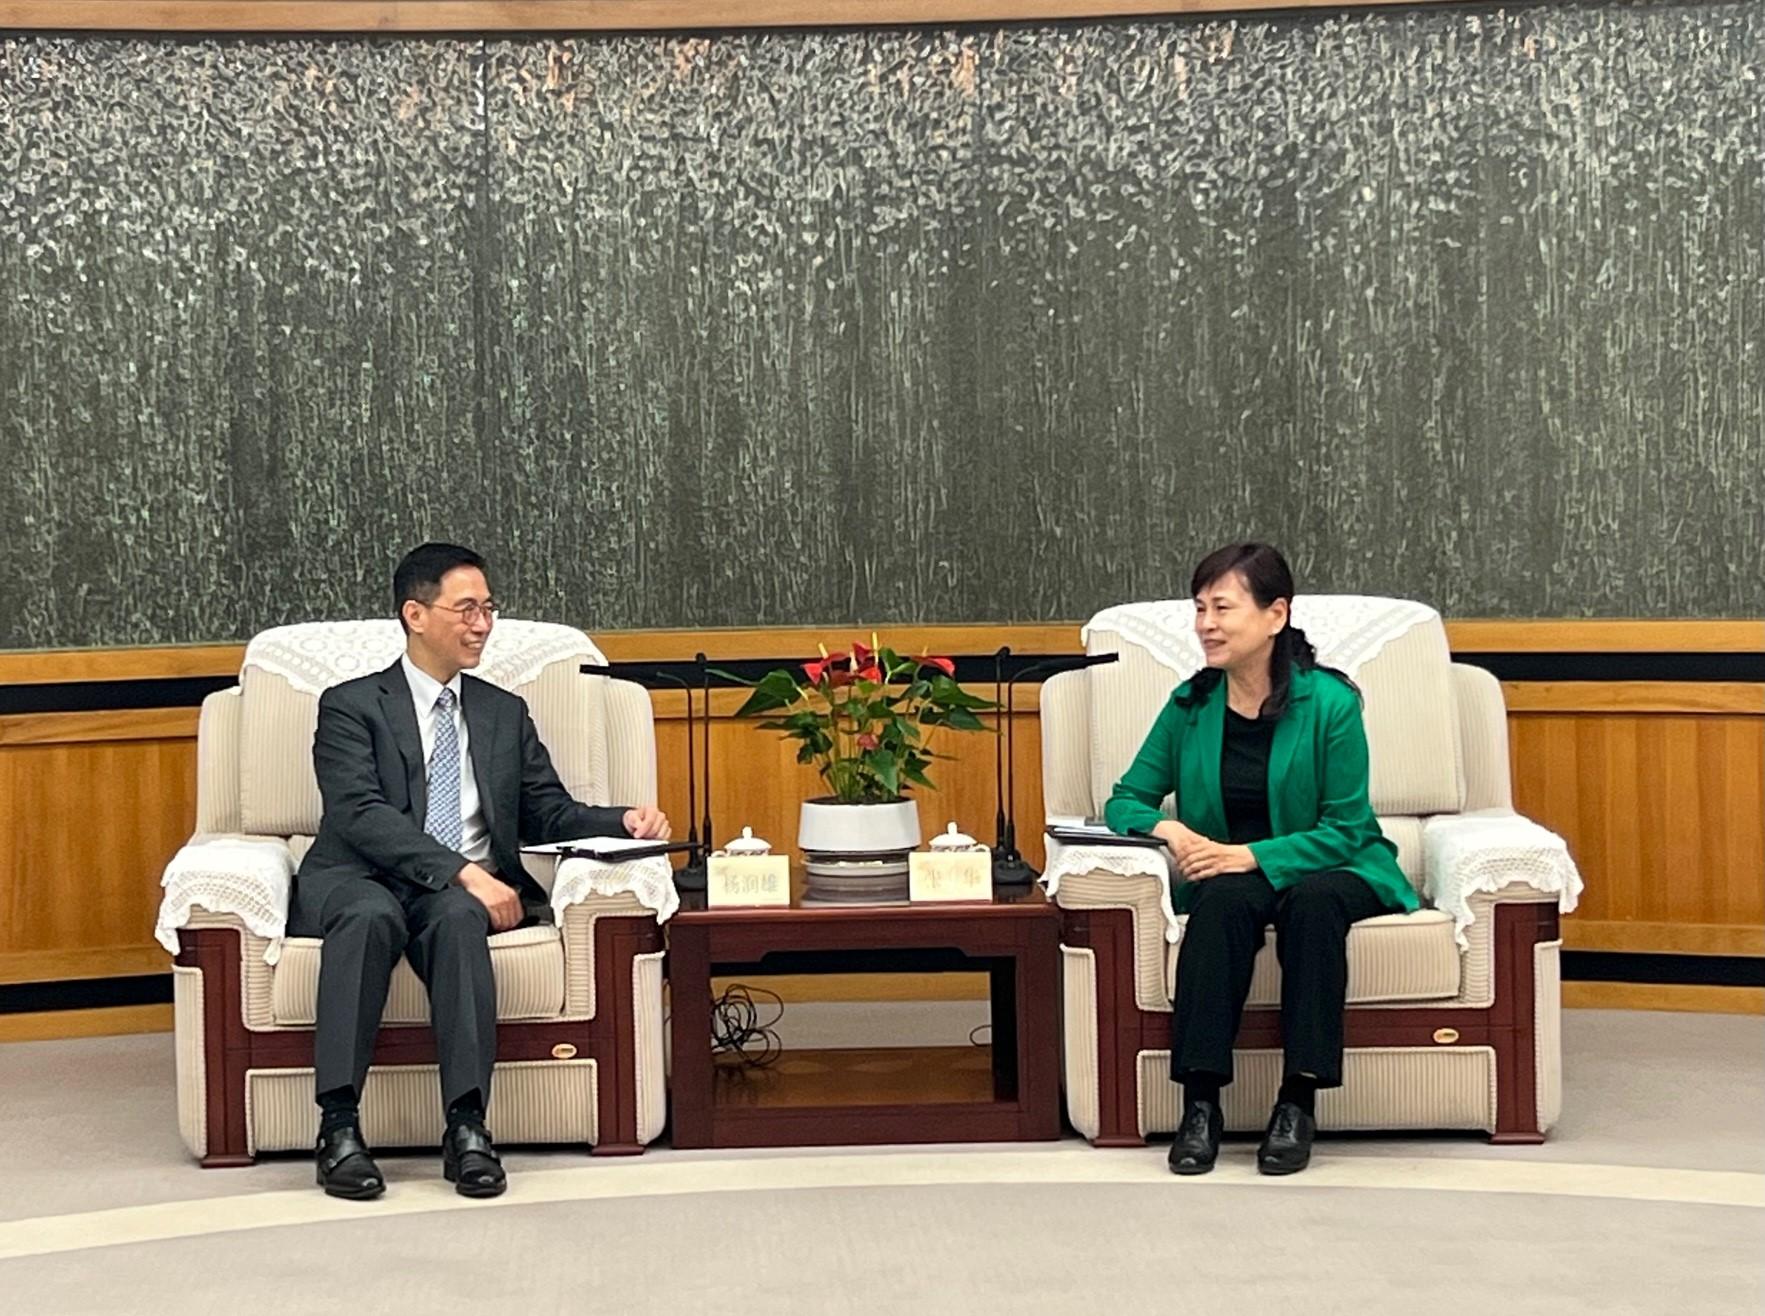 The Secretary for Culture, Sports and Tourism, Mr Kevin Yeung (left), today (April 18) called on Vice Mayor of Shenzhen Municipal People's Government Ms Zhang Hua (right) in Shenzhen. The Commissioner for Tourism, Ms Vivian Sum, the Deputy Secretary for Culture, Sports and Tourism, Mrs Vicki Kwok, and representatives from the Hong Kong Tourism Board and the Travel Industry Authority also joined the visit.